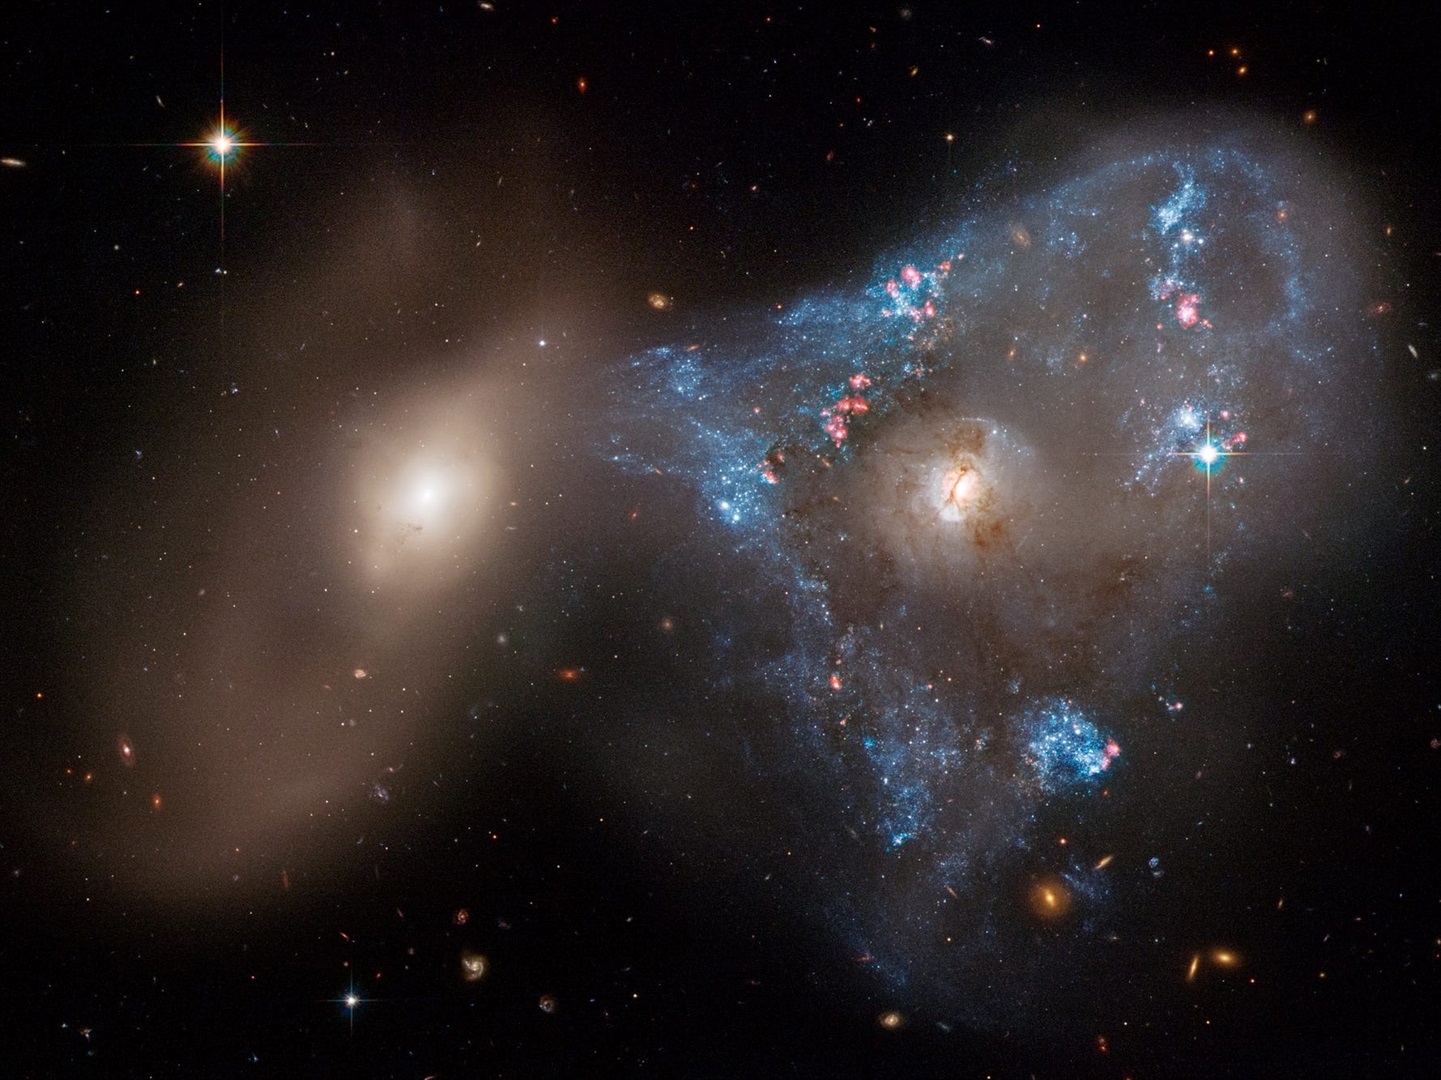 Two galaxies colliding, as photographed by the Hubble Space Telescope.